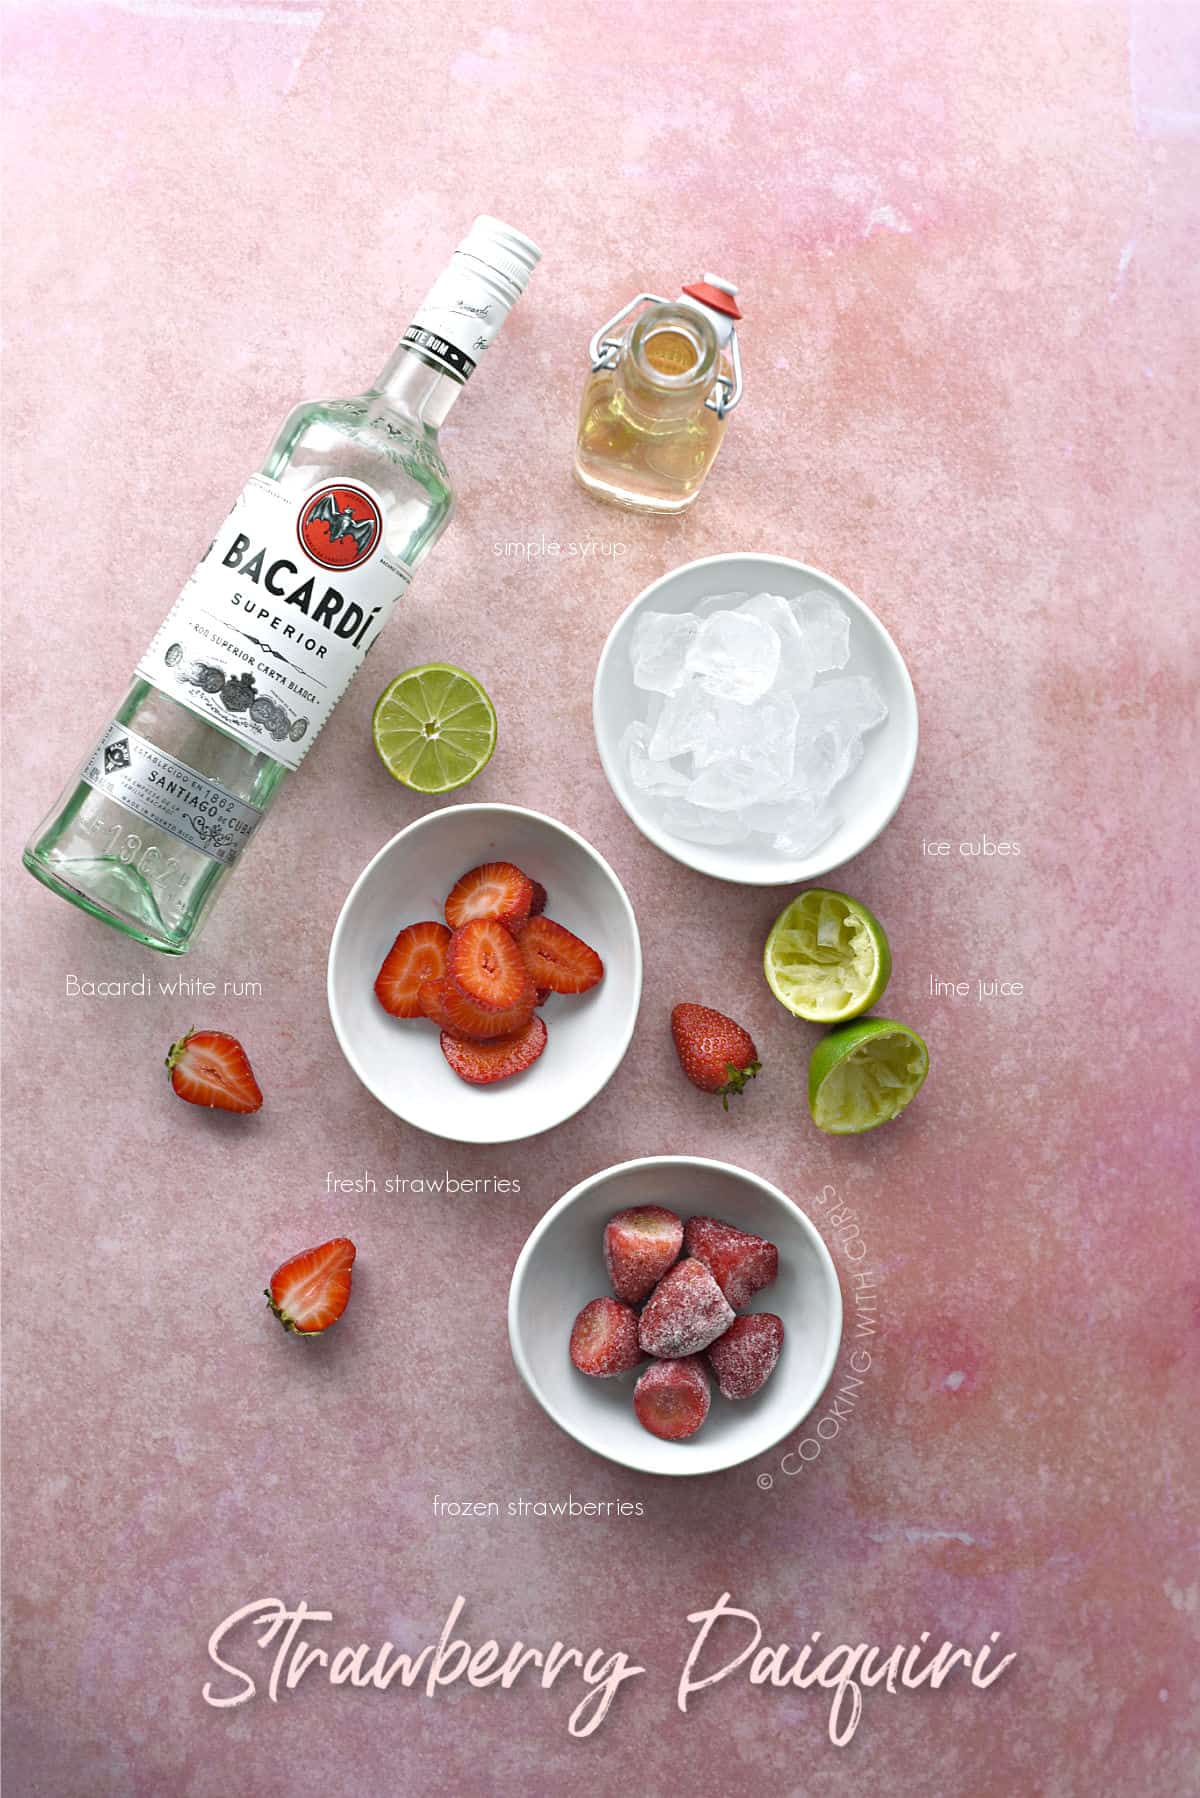 a bottle of Bacardi rum laying on it's side next to a bottle of simple syrup, and bowls of strawberries and ice cubes with squeezed limes in between. 